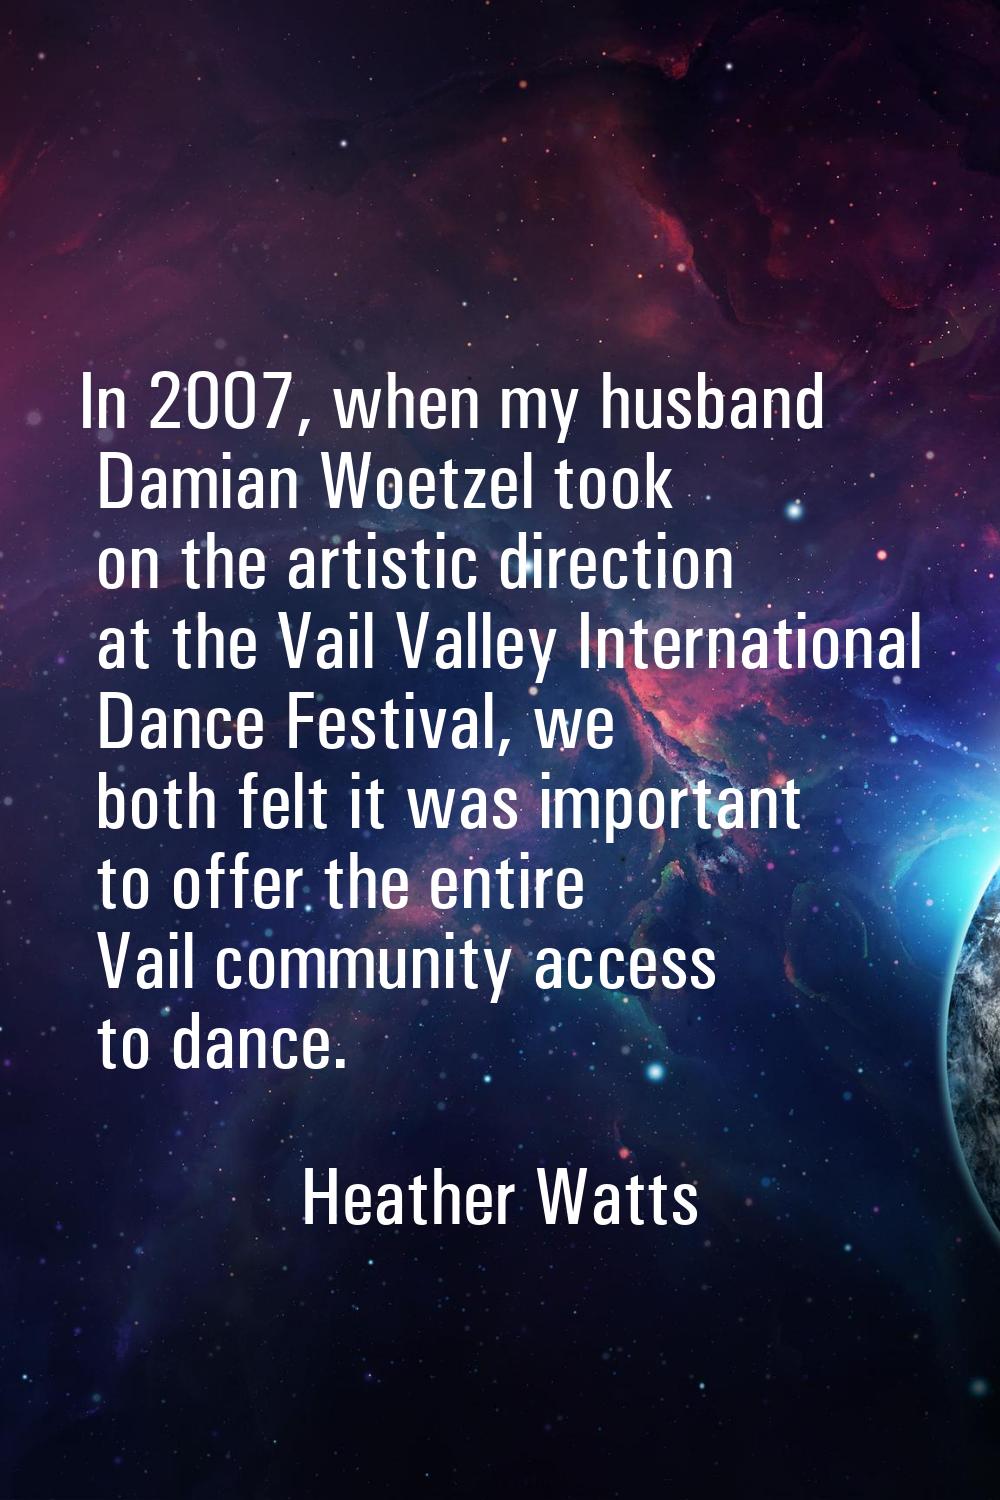 In 2007, when my husband Damian Woetzel took on the artistic direction at the Vail Valley Internati